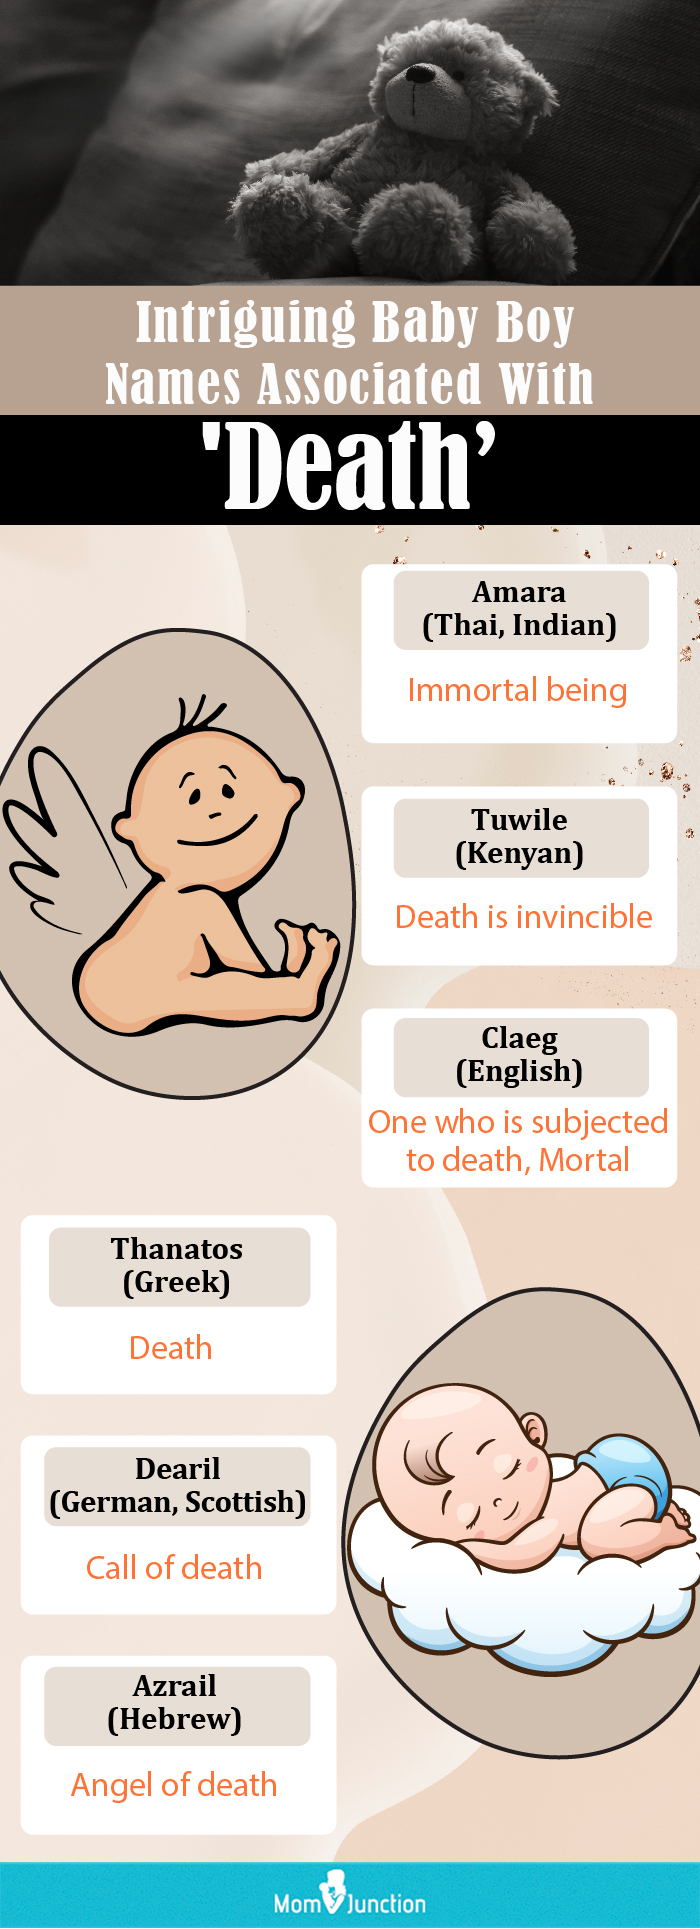 enigmatic baby boy names that mean death (infographic)